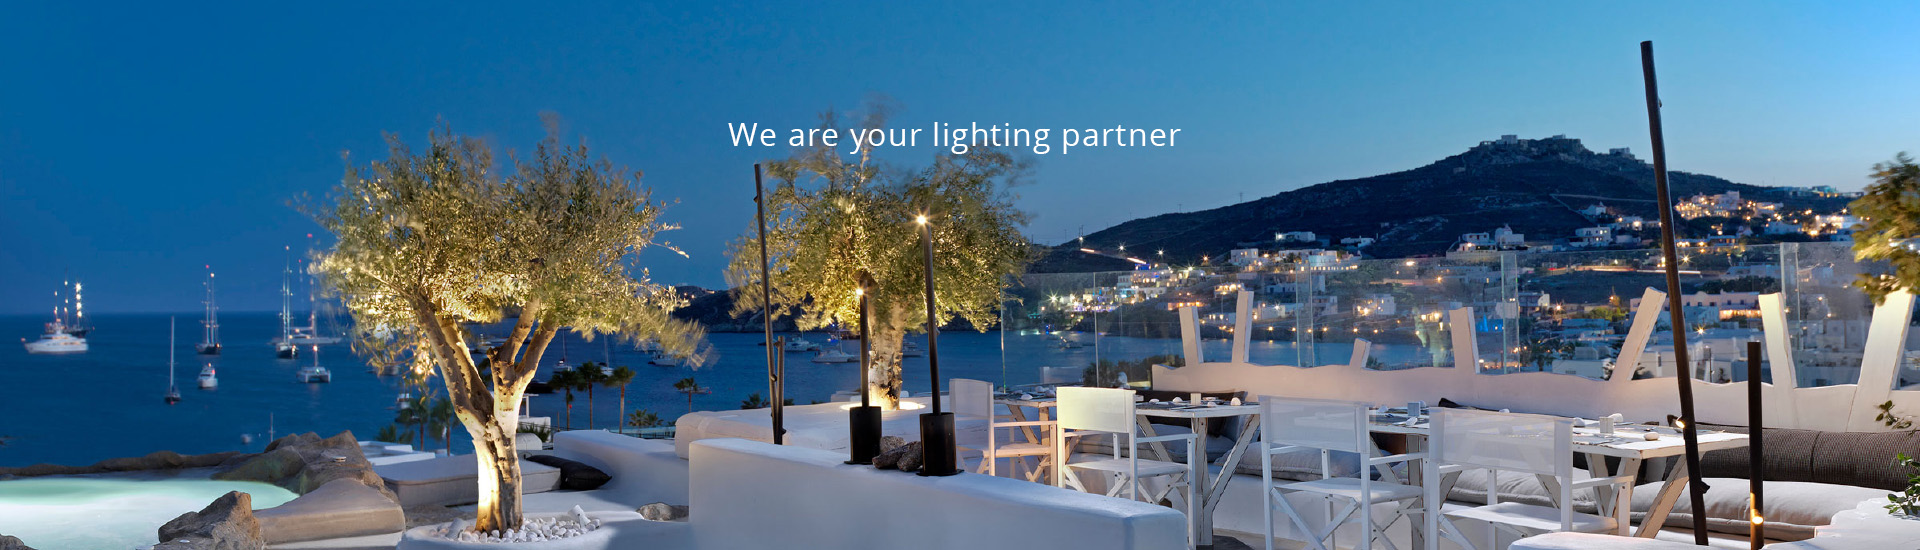 We are your lighting partner